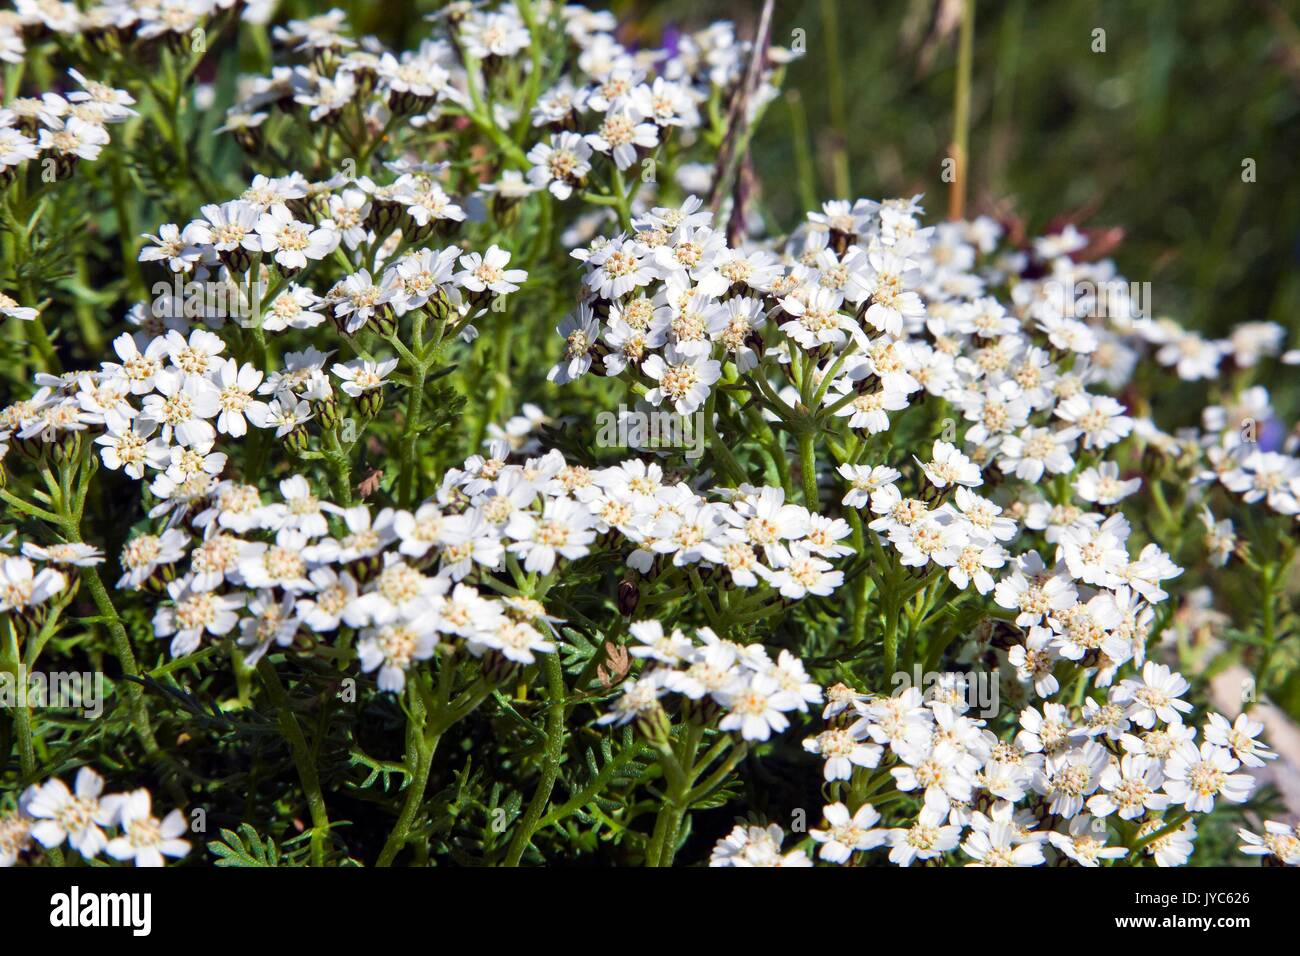 Achillea erba-rotta, common name Simple Leaved Milfoil, is a perennial flowering plant of the genus Achillea, belonging to the Asteraceae family, used Stock Photo